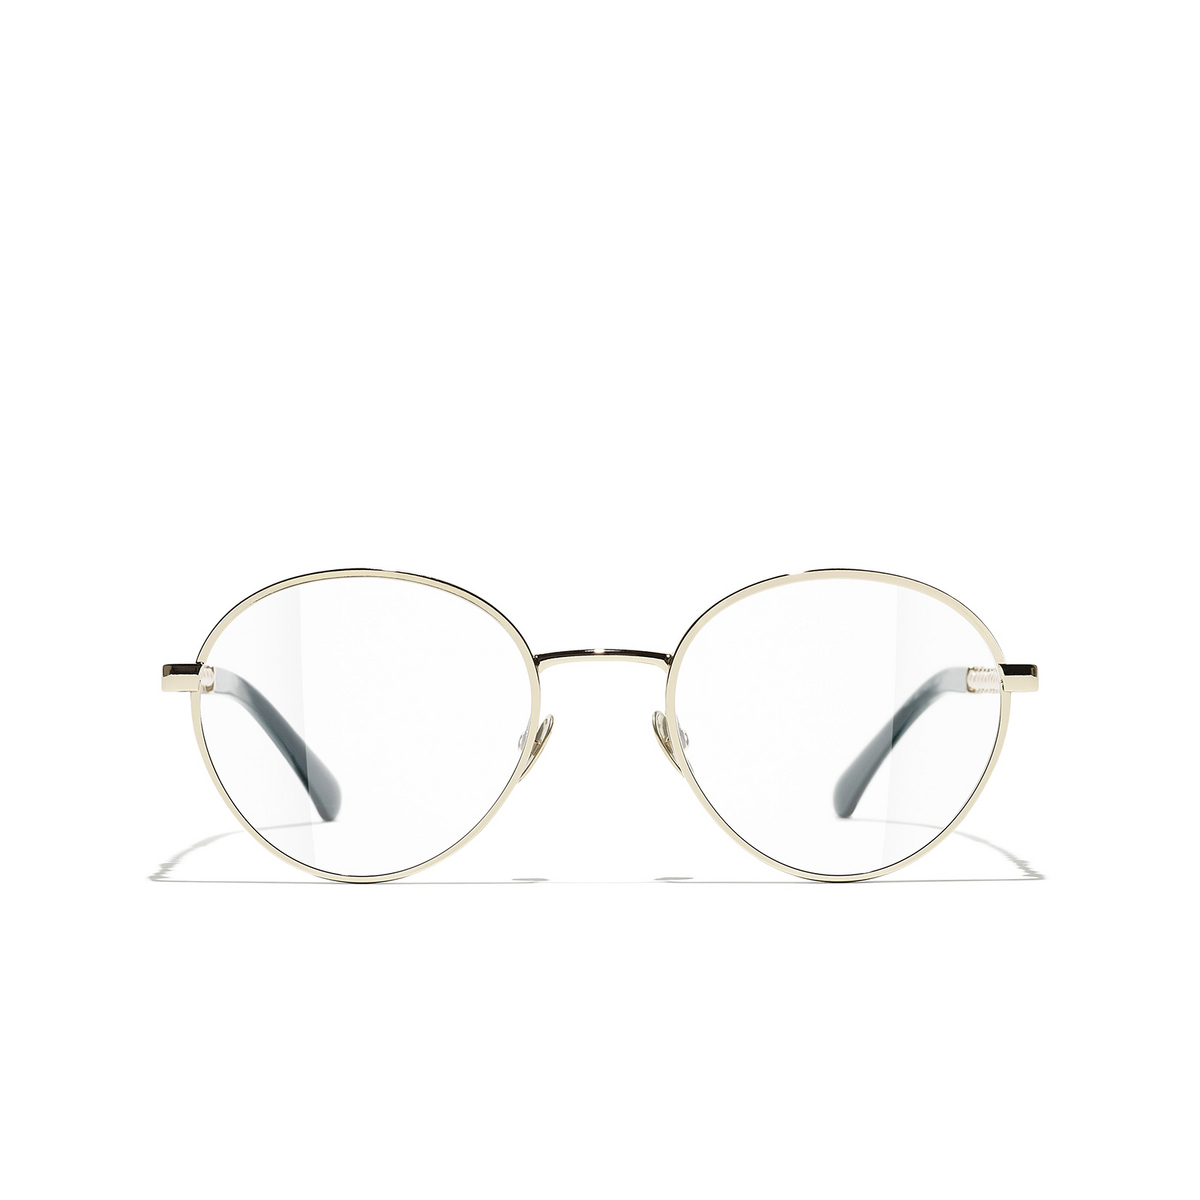 CHANEL round Eyeglasses C468 Gold & Green - front view